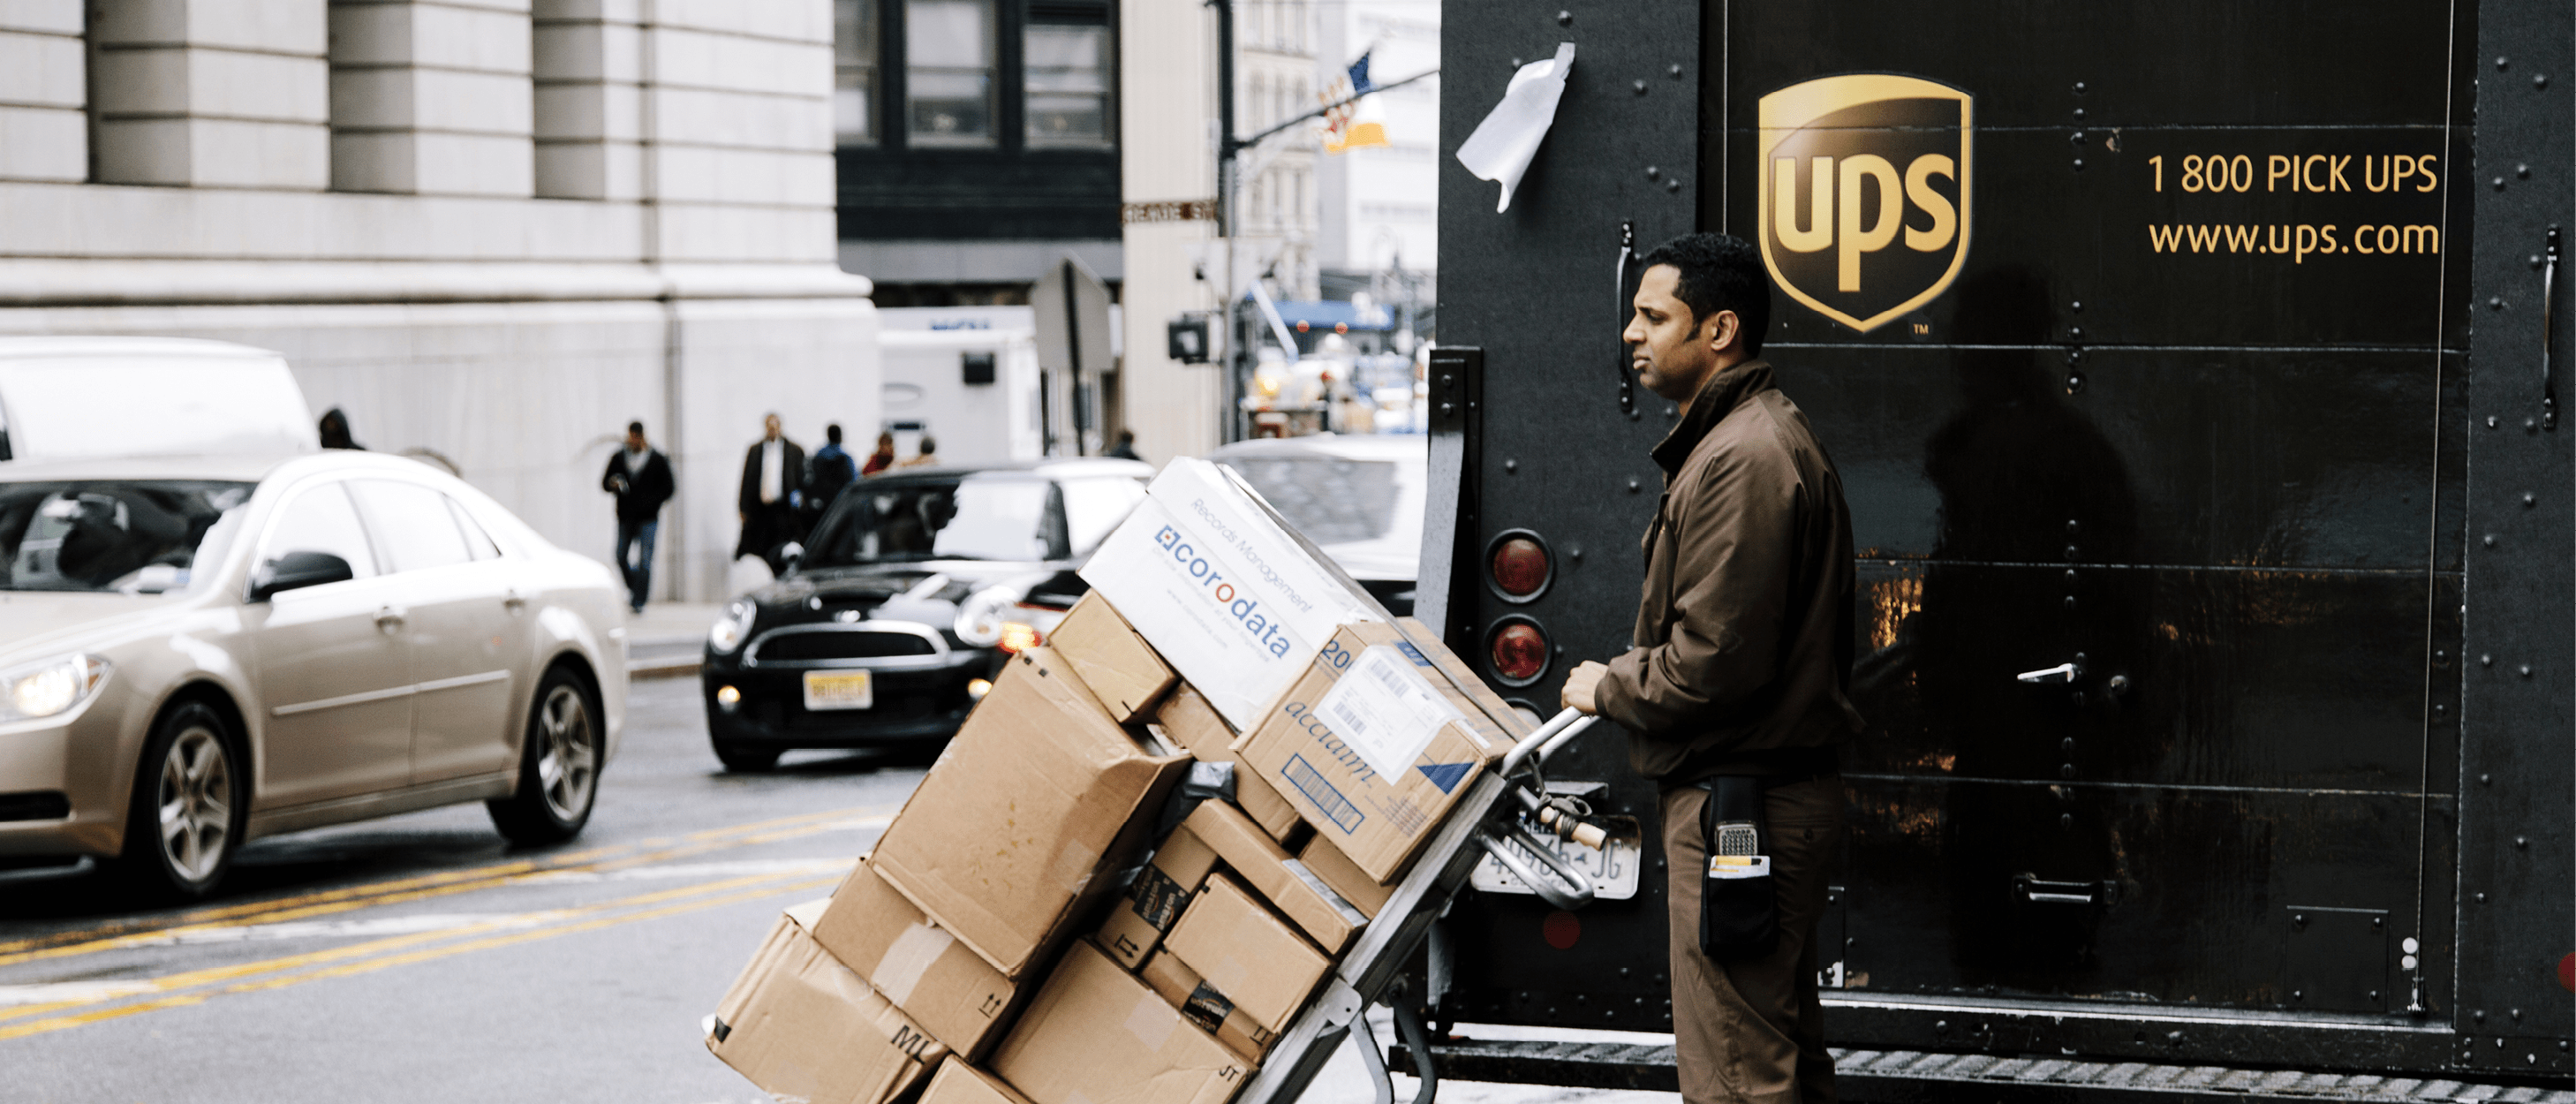 How To Become A UPS Delivery Driver 21